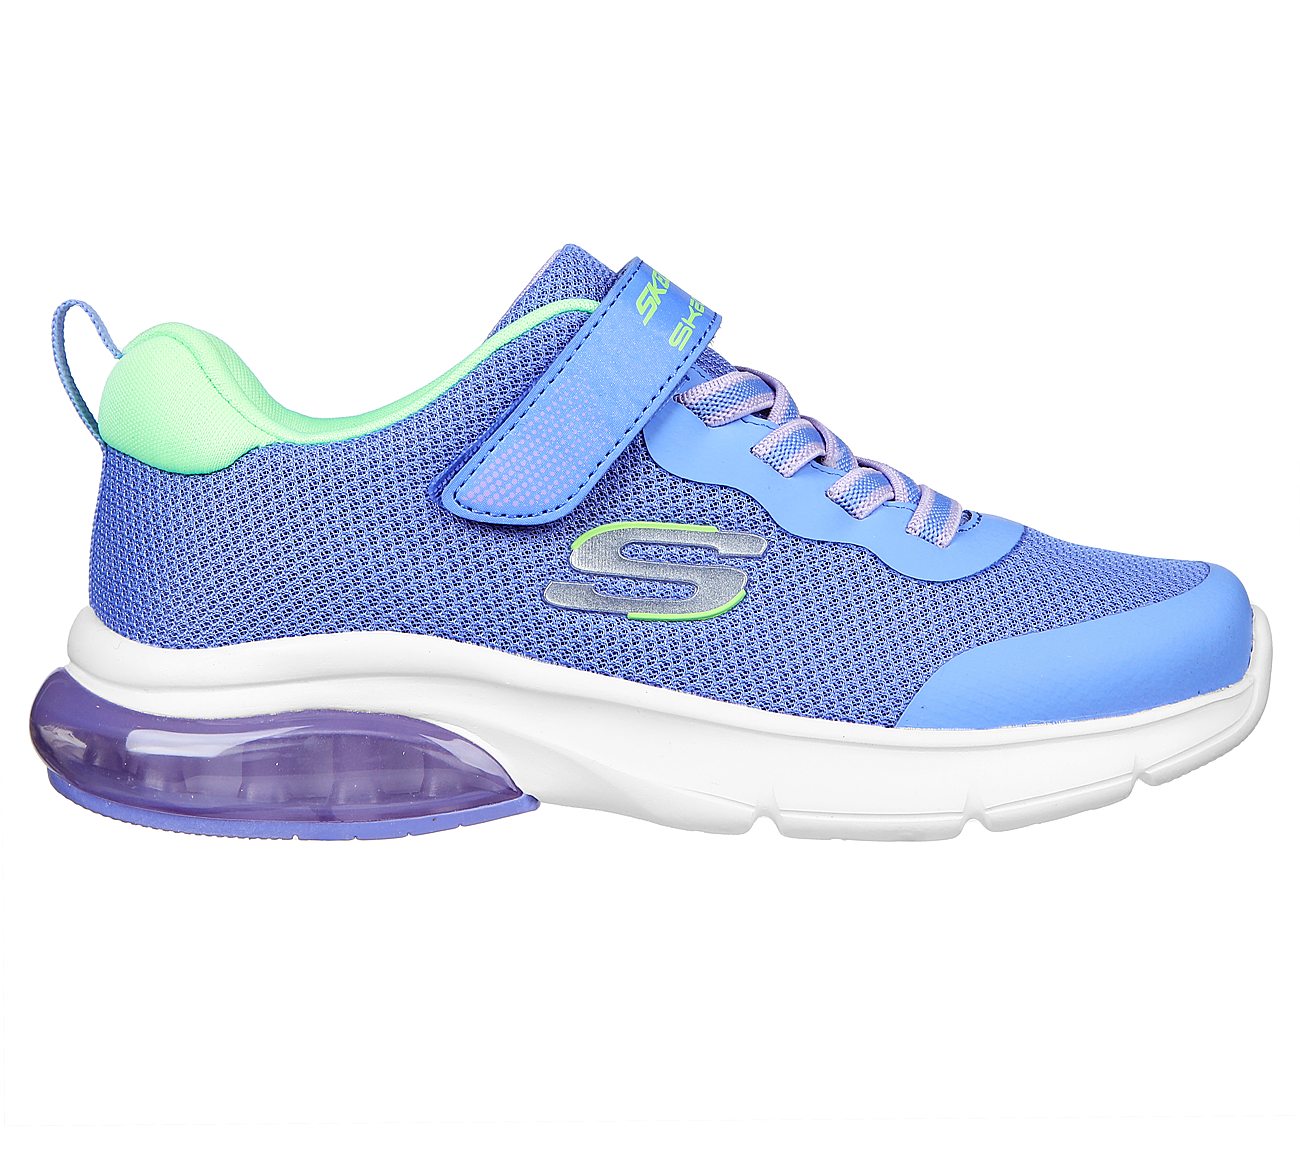 SKECH-AIR AIRMATIC, BLUE/LIME Footwear Lateral View